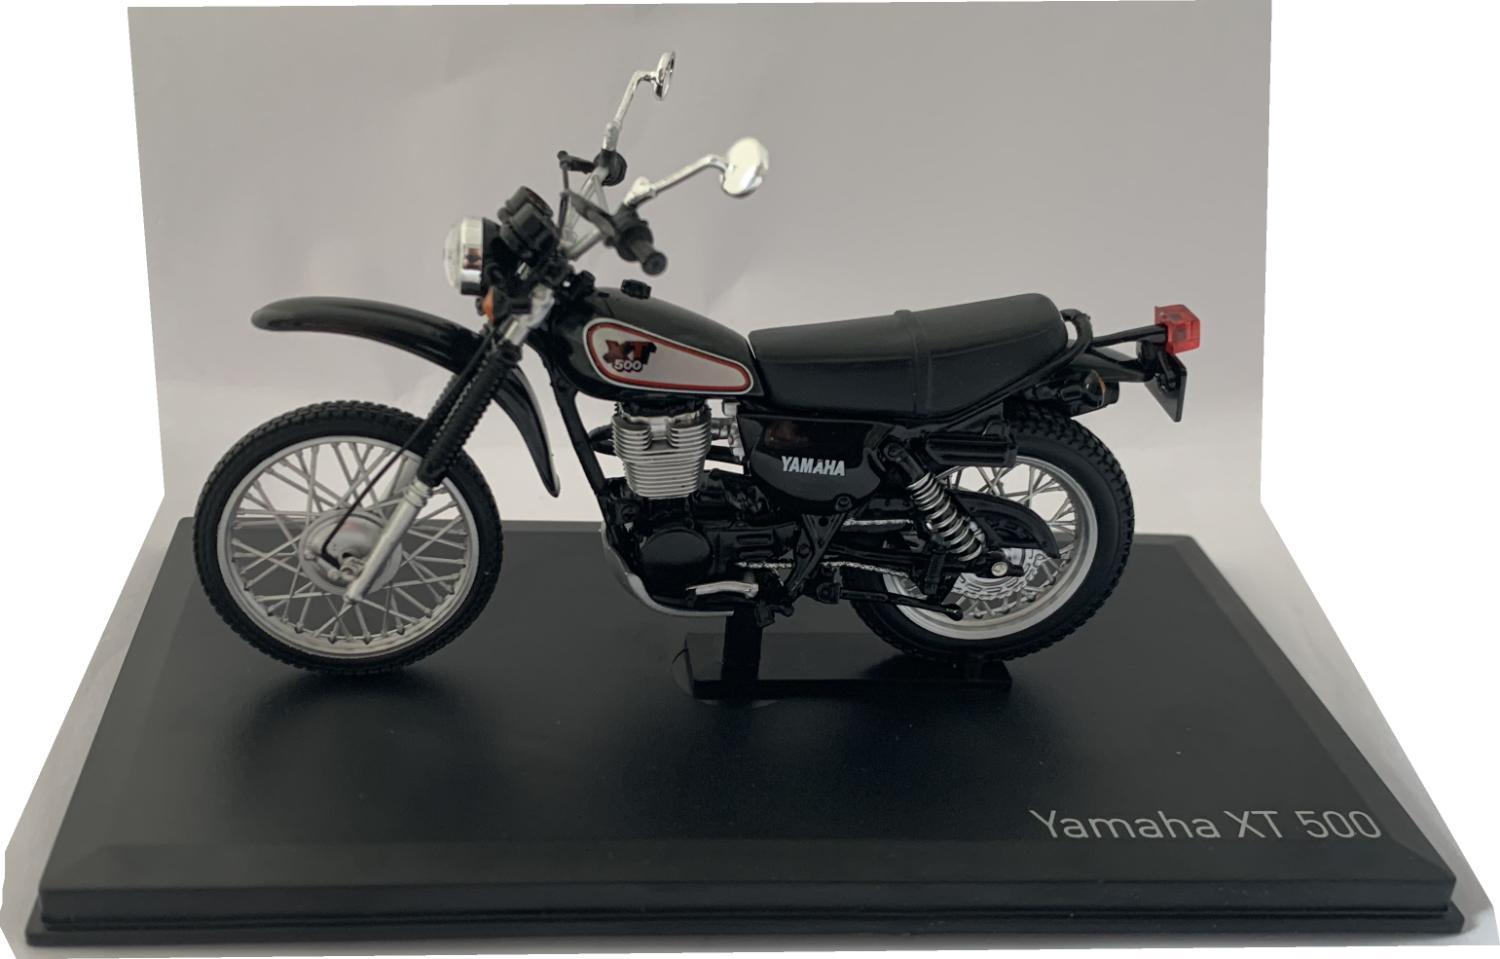 Yamaha XT 500 1988 in black / silver 1:18 scale motorbike model from Norev